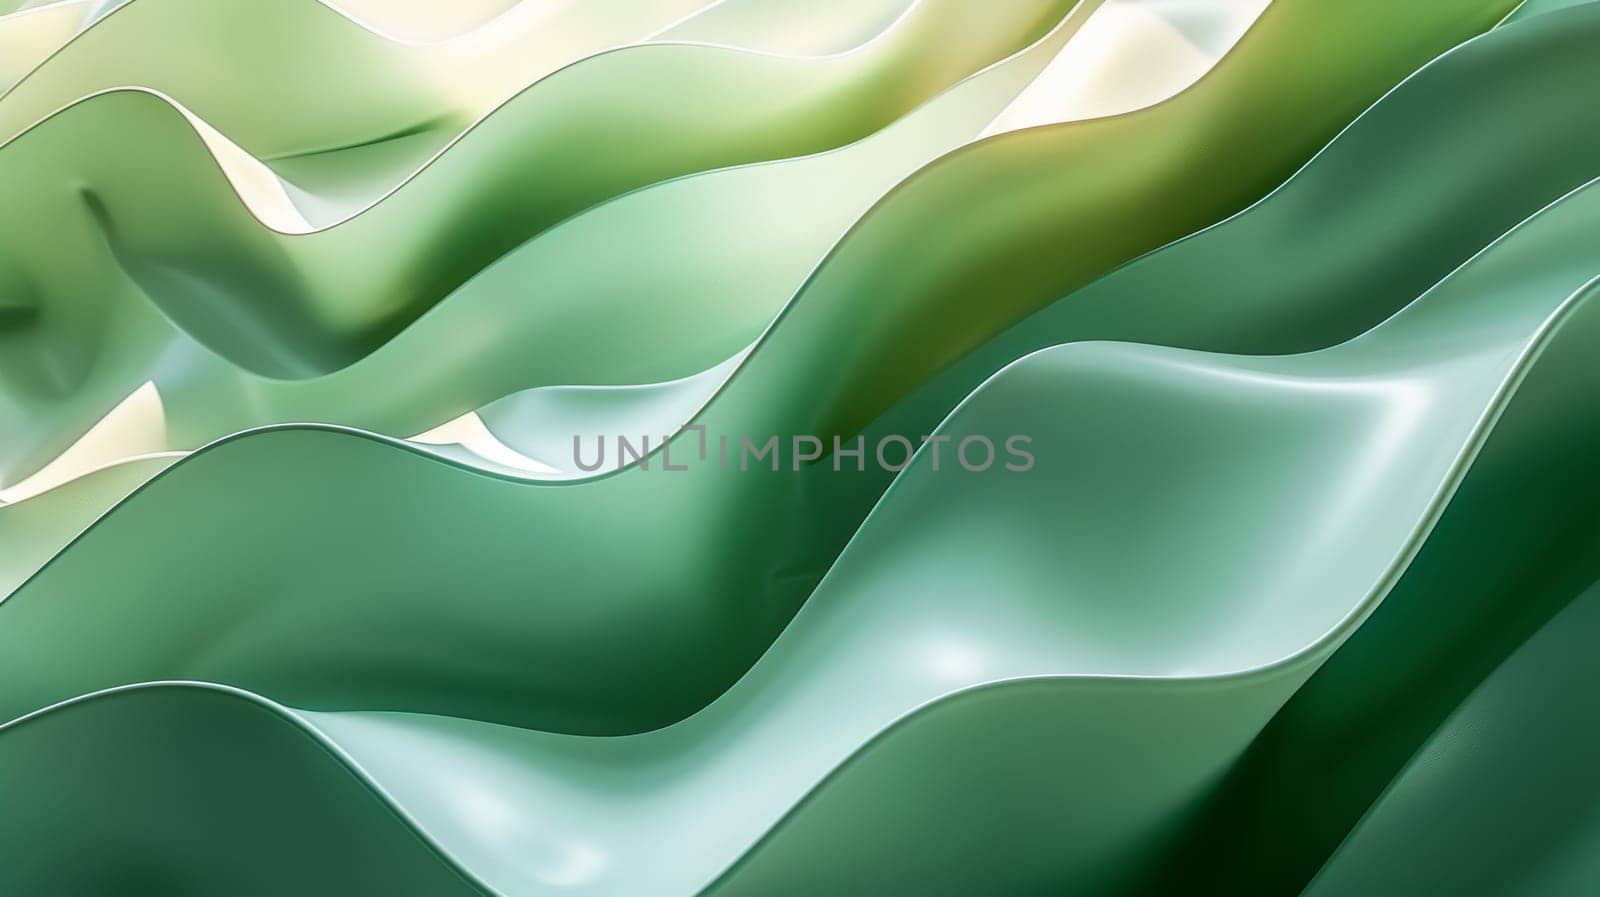 A green wave with a white background. The wave is made of glass and has a shiny, reflective surface. The image has a calm and serene mood, as if it were a peaceful ocean scene